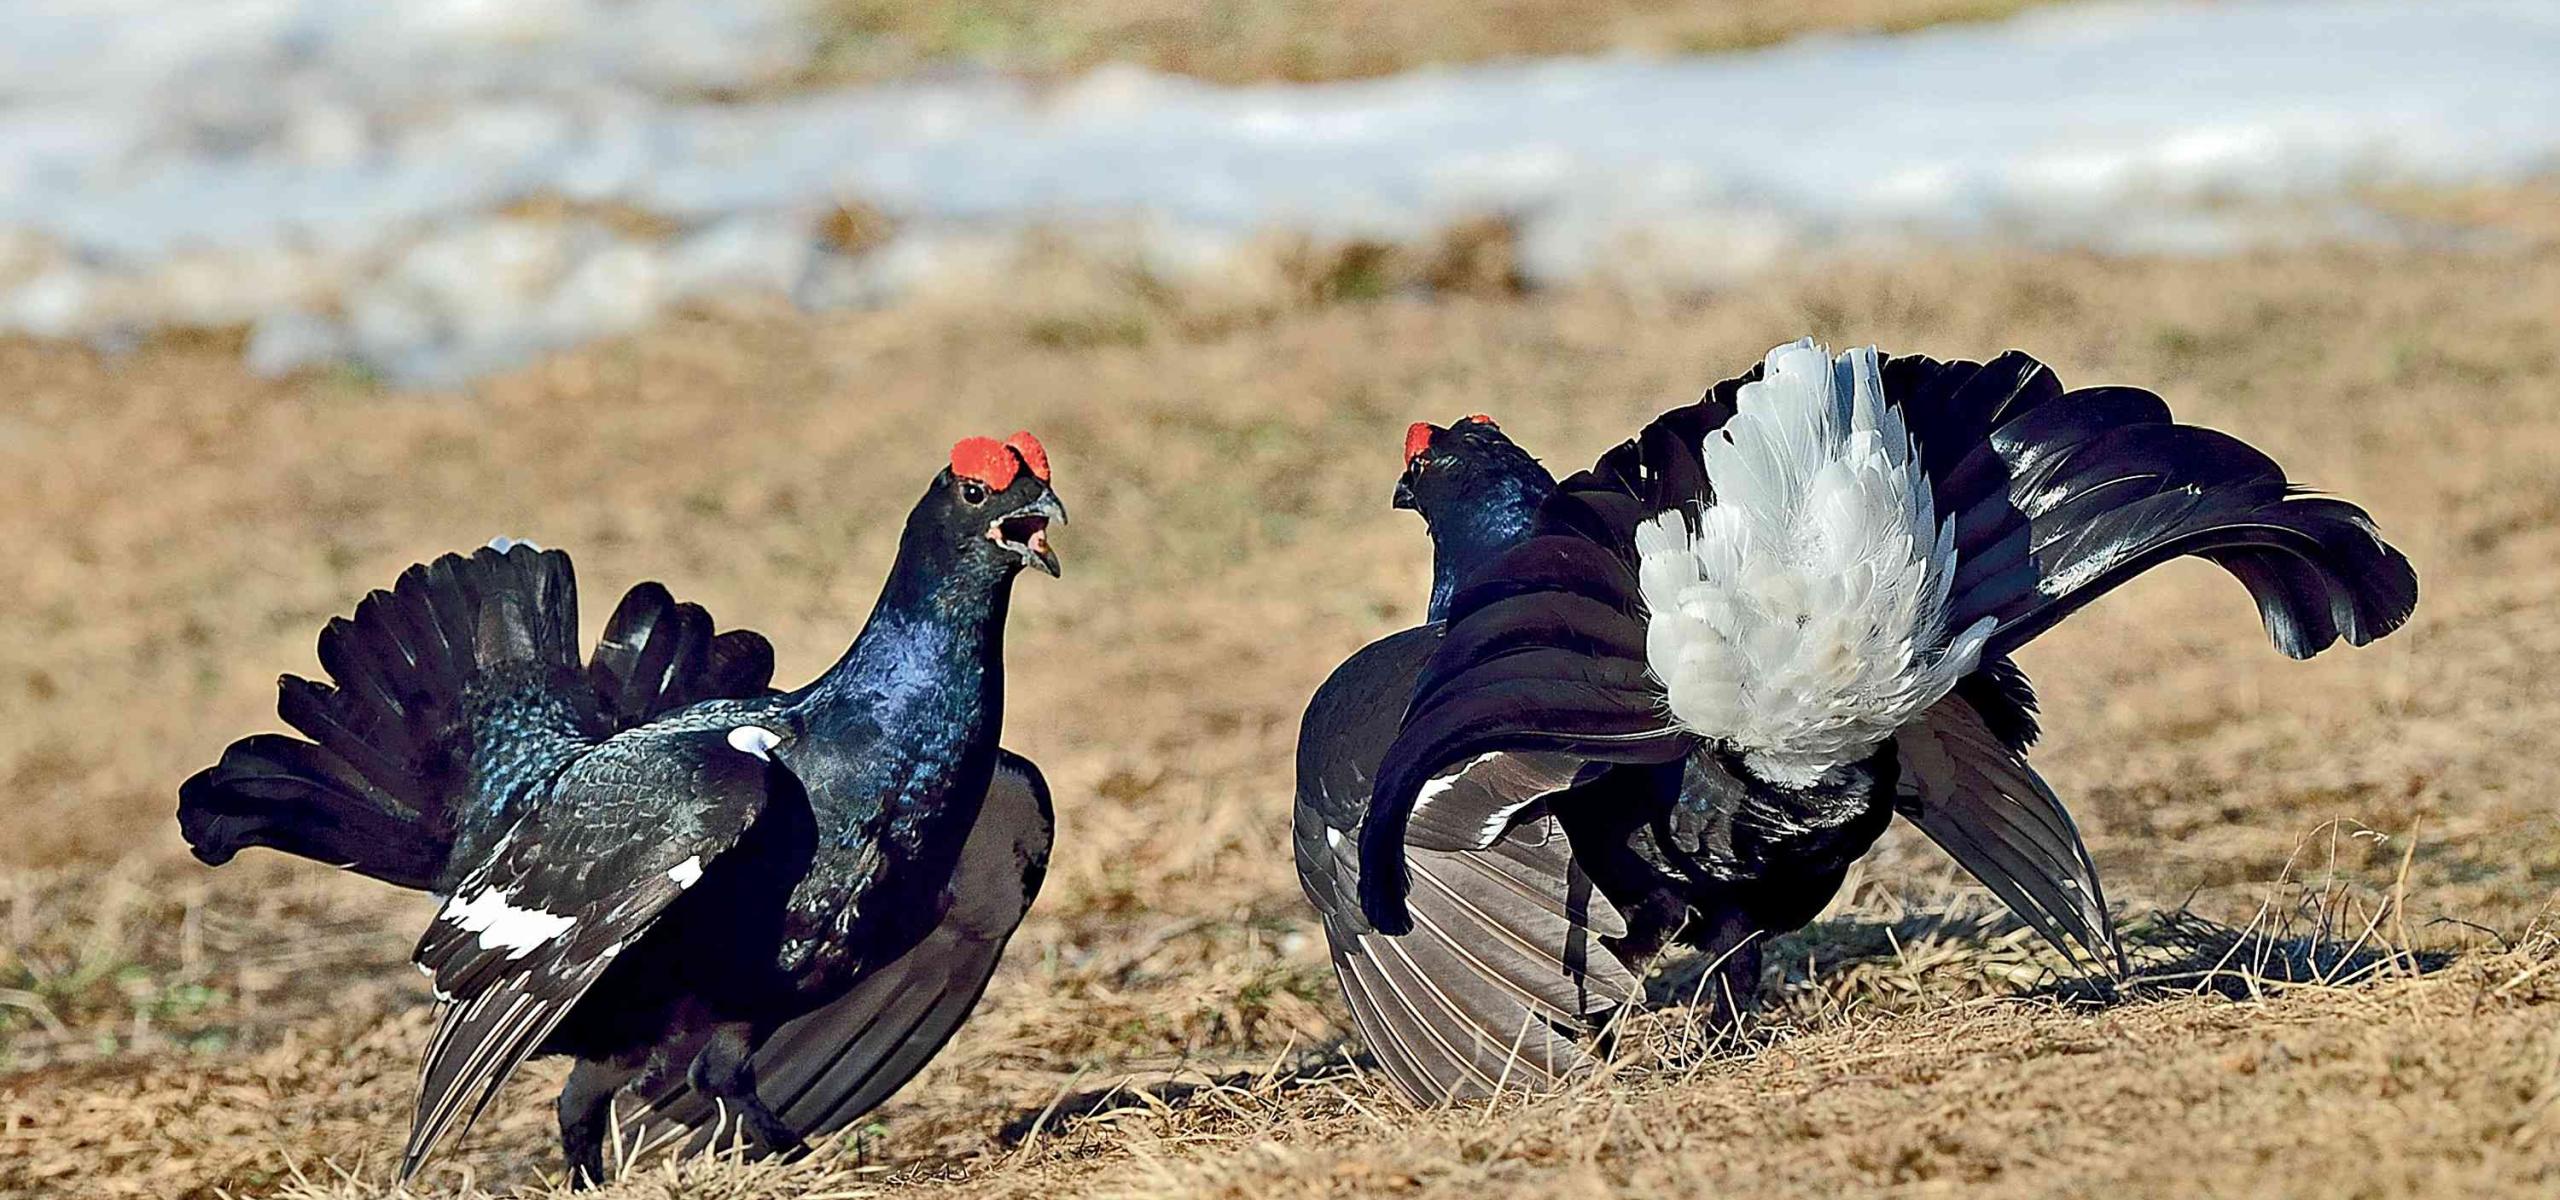 2 Black grouse arguing during courtship.